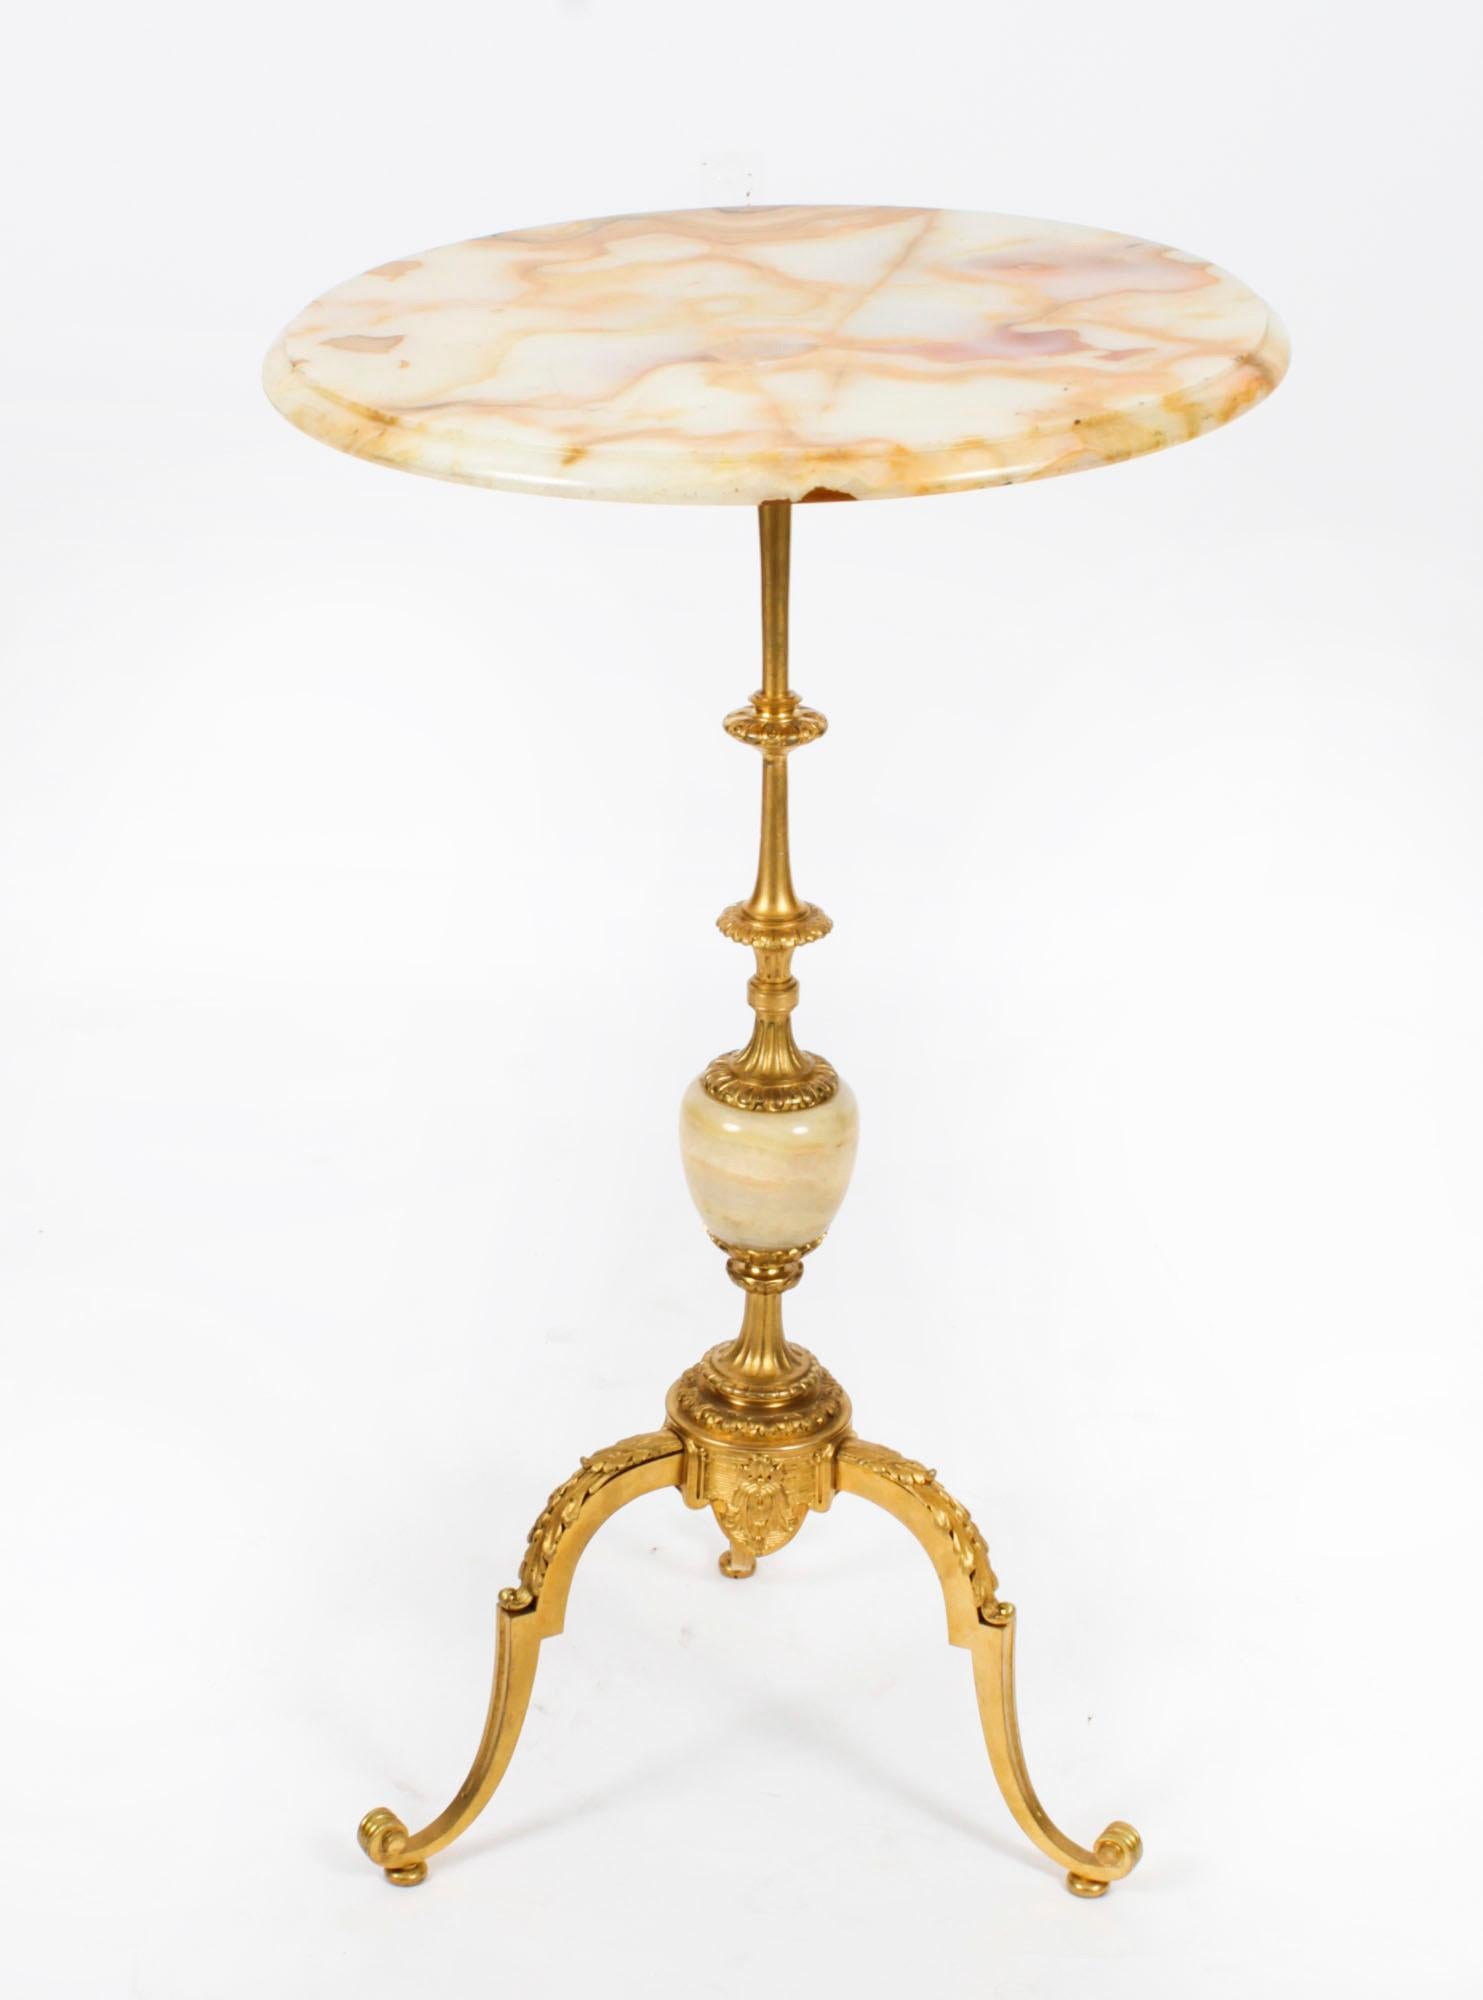 An Antique French Ormolu and Onyx occasional table Circa 1880 in date.
 
The circular table features an urn shaped stem, leaf cast scrolled cabriole legs and a decorative onyx top.
 
Add some French sophistication to your home with this amazing